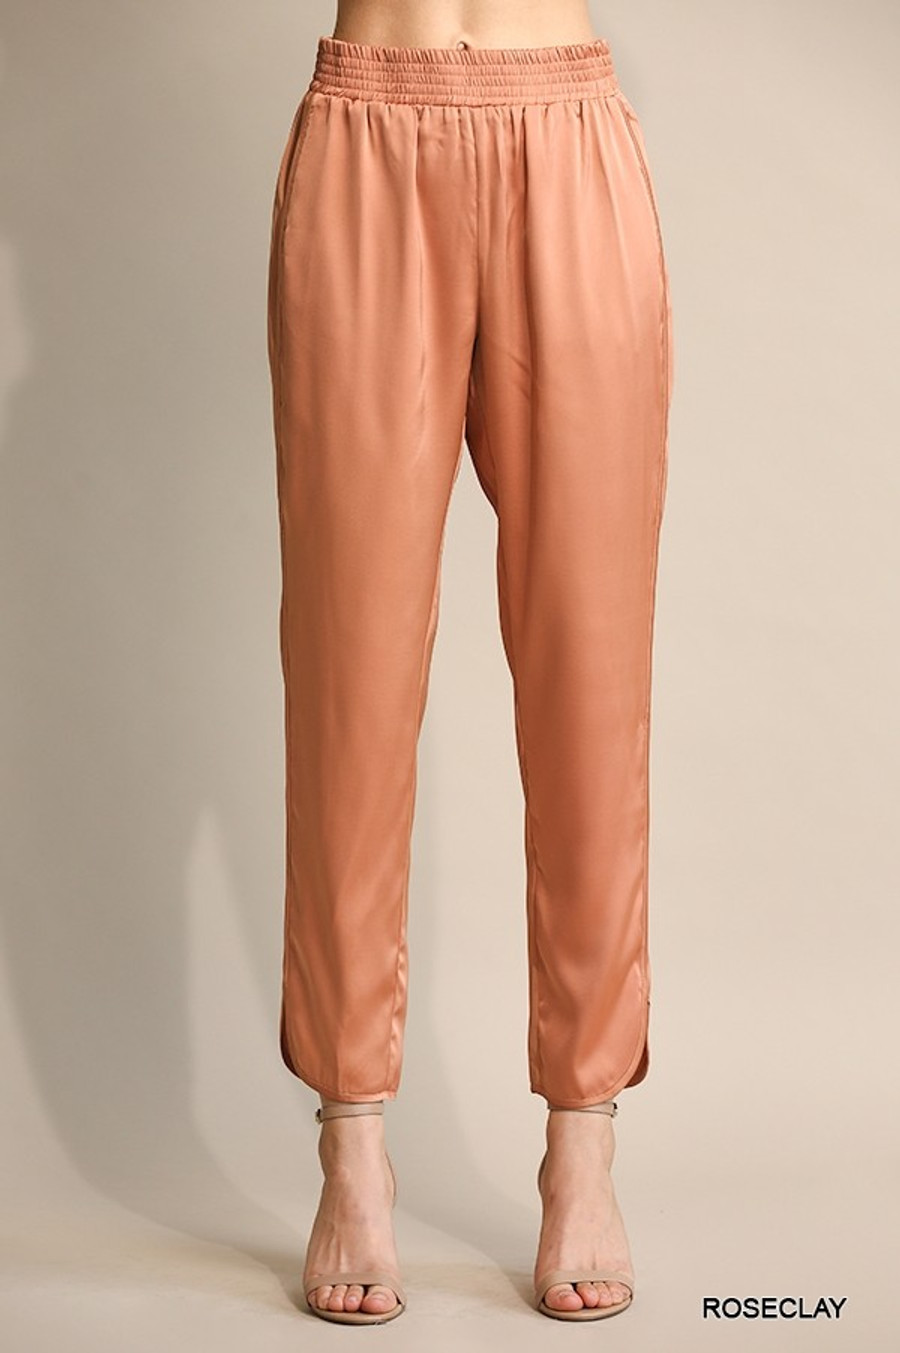 Solid Satin & Elastic Waist Pants W/Side Slits & Pock- In Rose Clay 